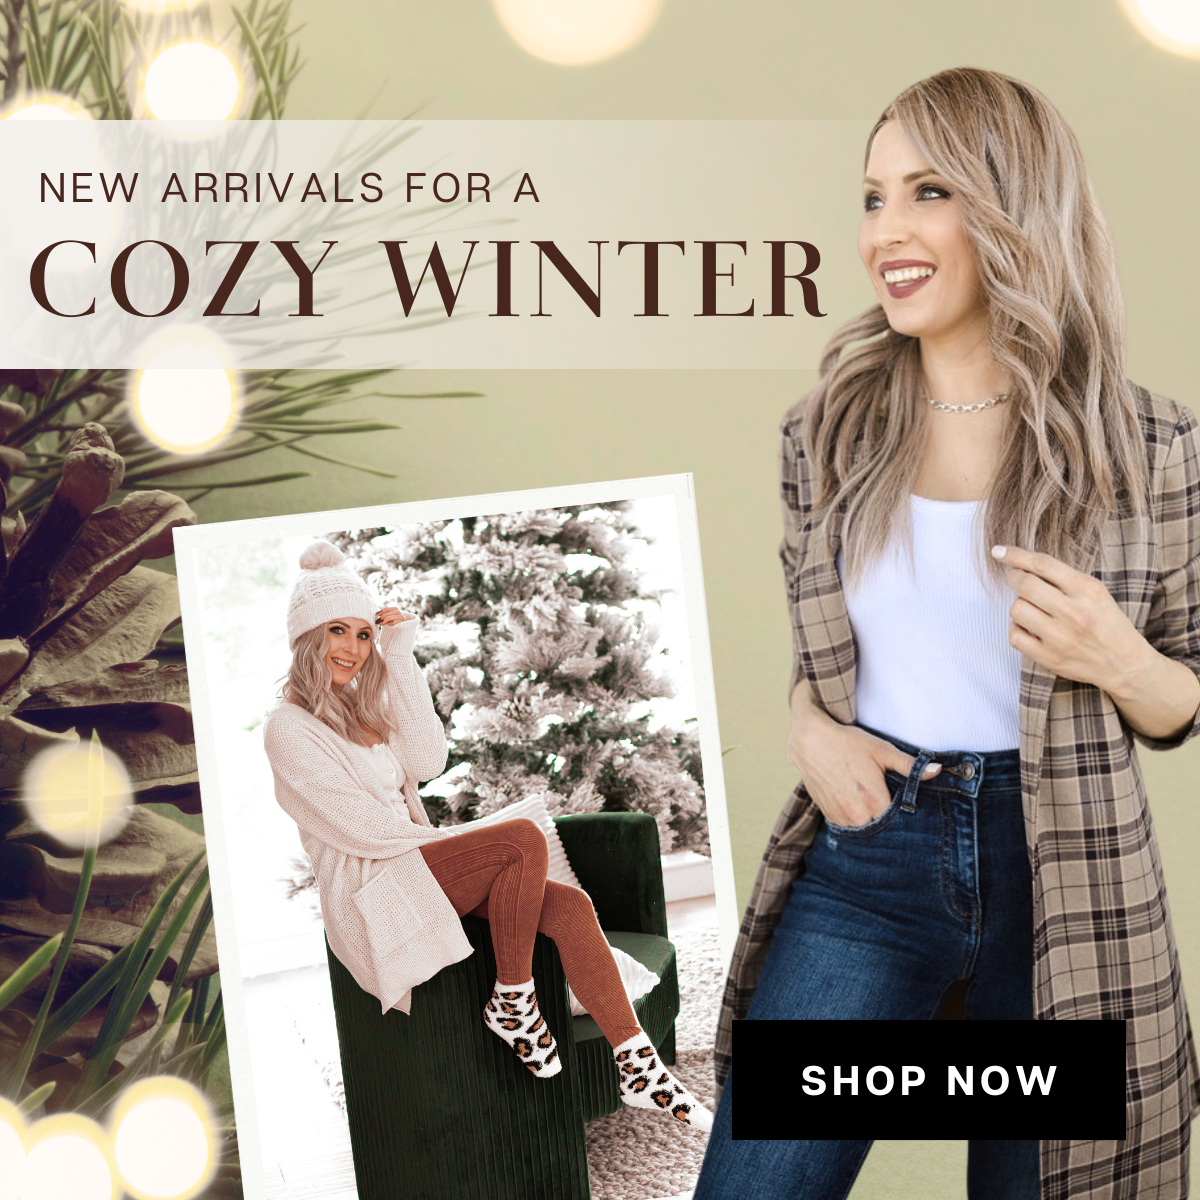 Krush Kandy | Best Online Boutique for Women | Shop our new arrivals for cozy winter fashion